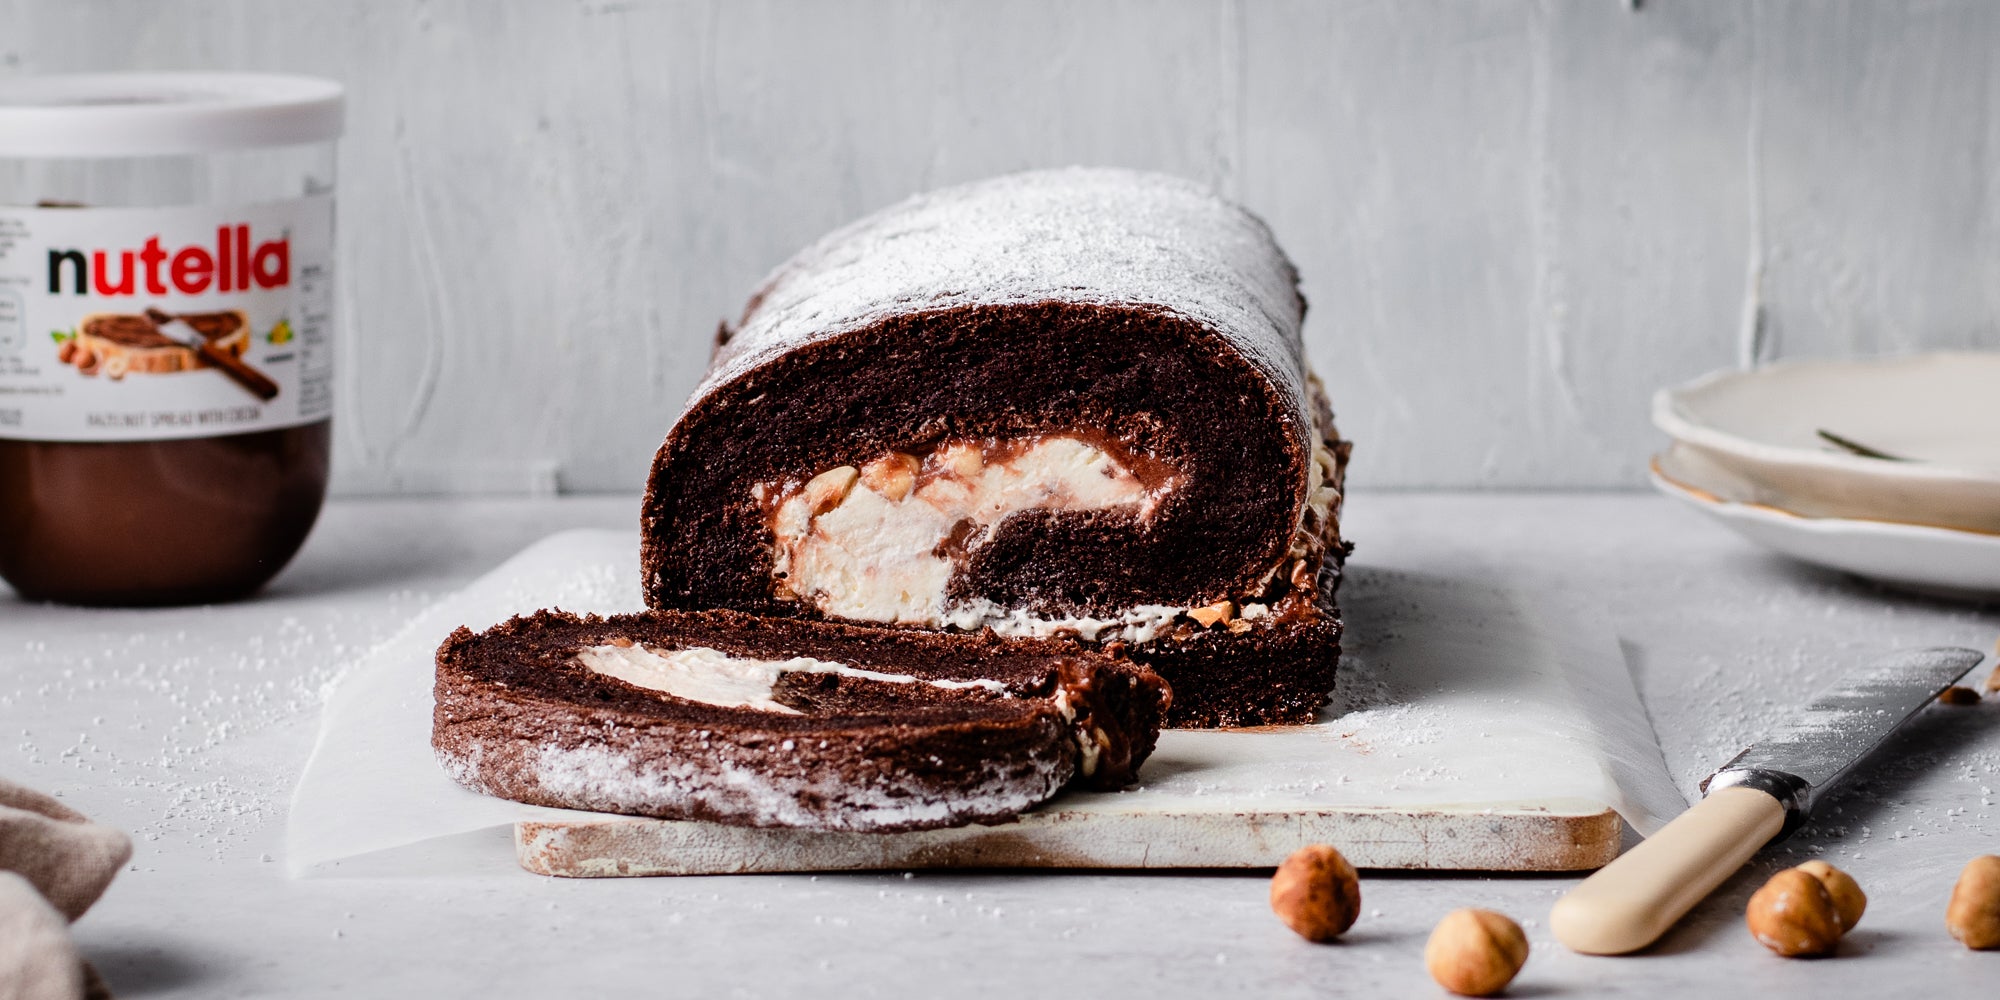 Close up of Chocolate Roulade with a slice cut off showing the thick creamy insides. Jar of Nutella in the background